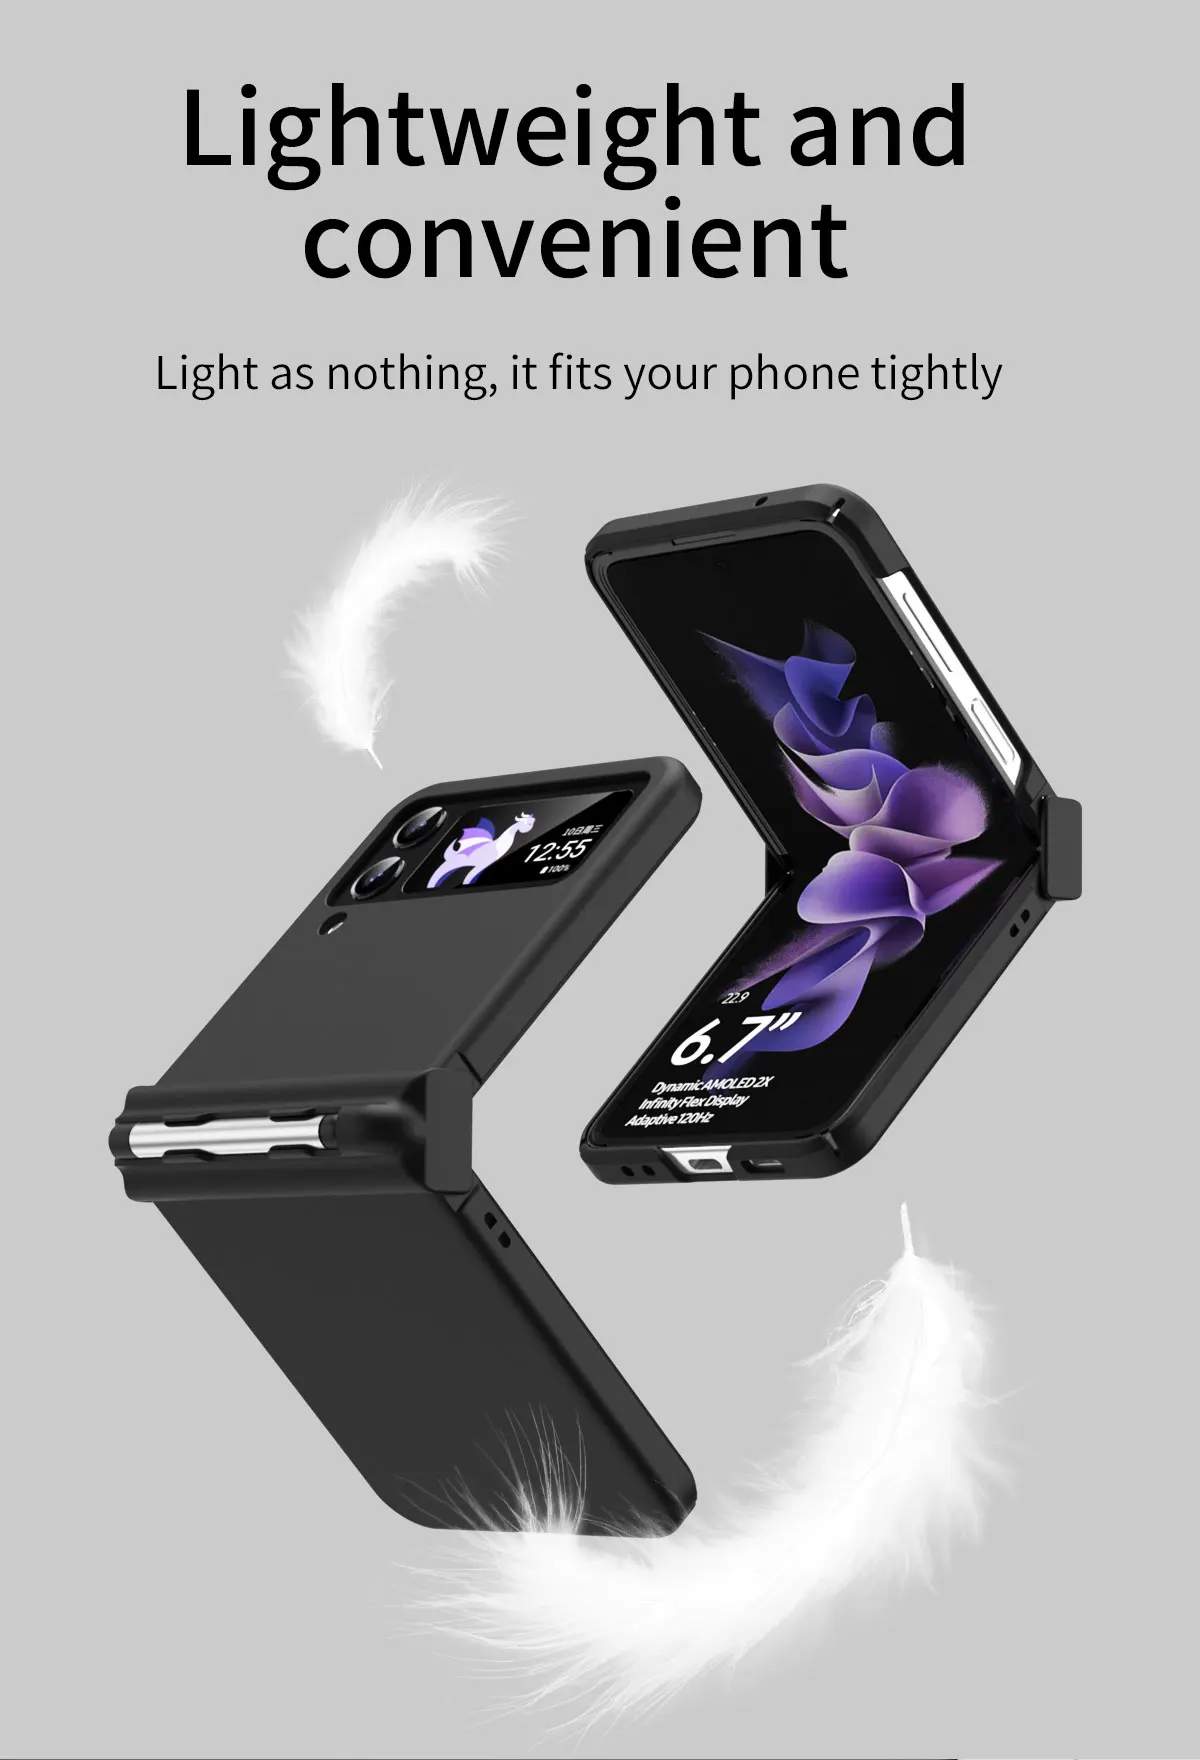 Lightweight and convenient. It fits your phone tightly